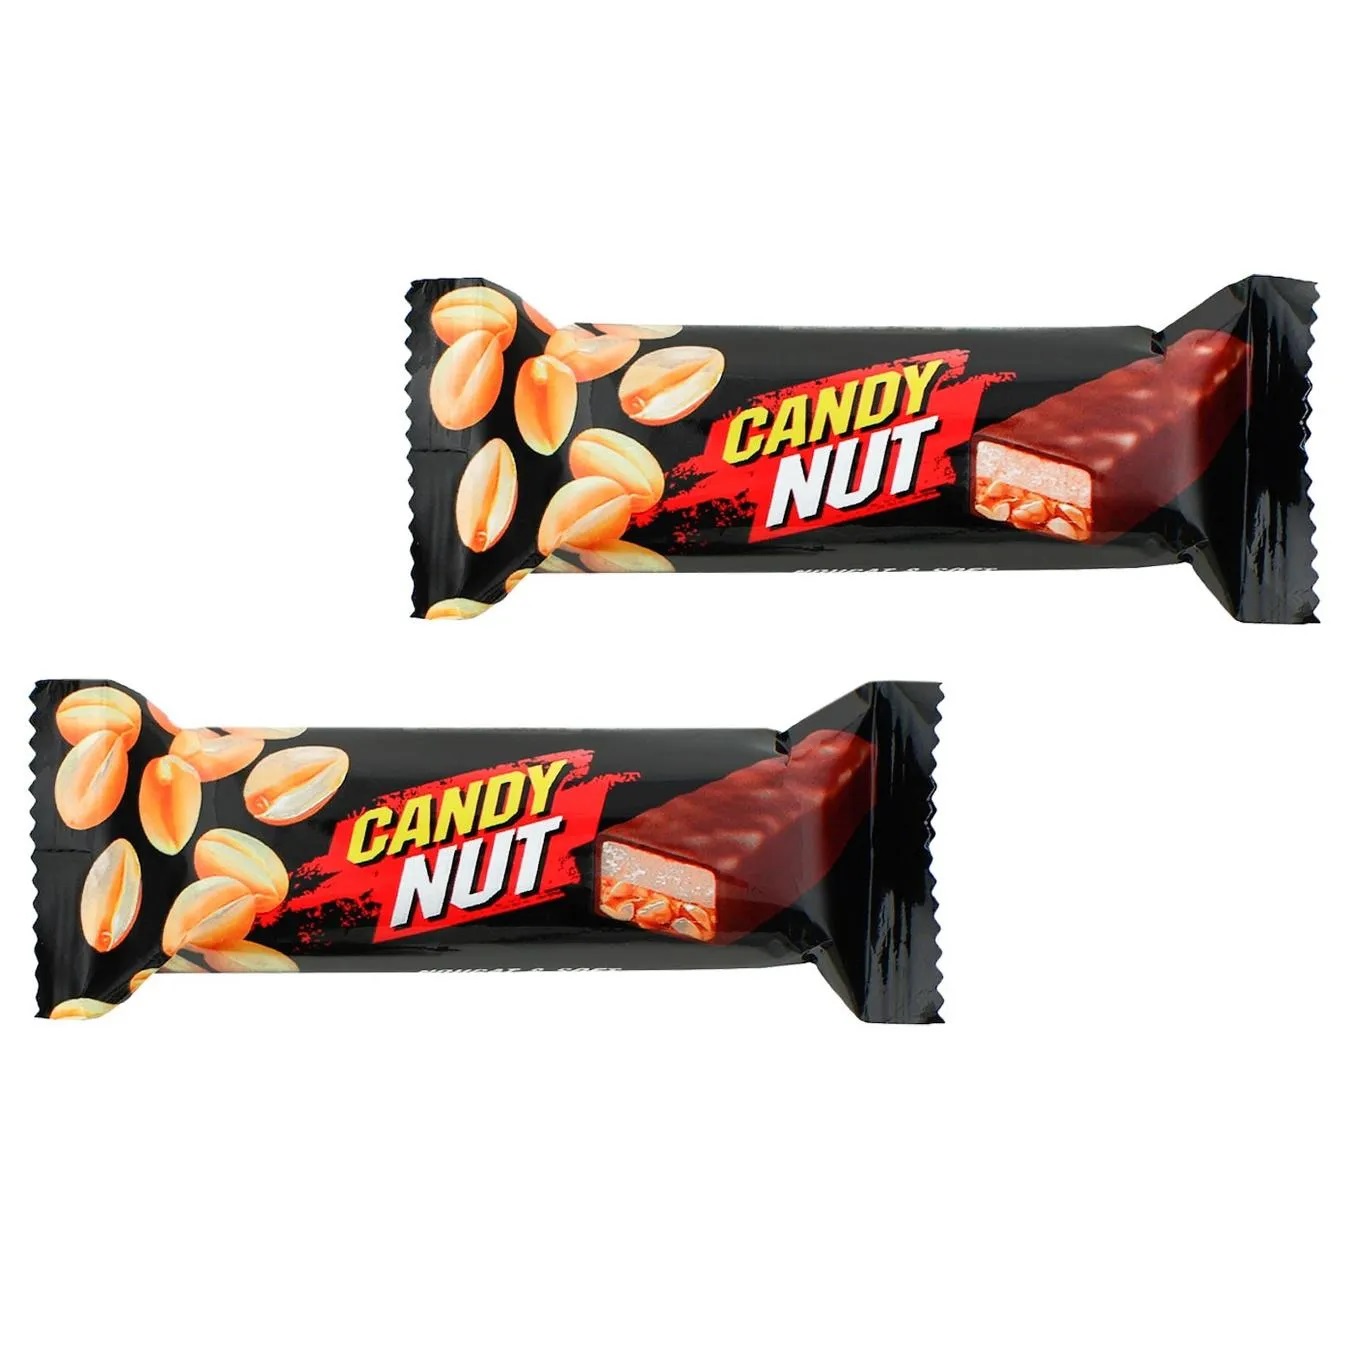 Candies Roshen Candy Nut Nougat And soft Caramel With Peanuts